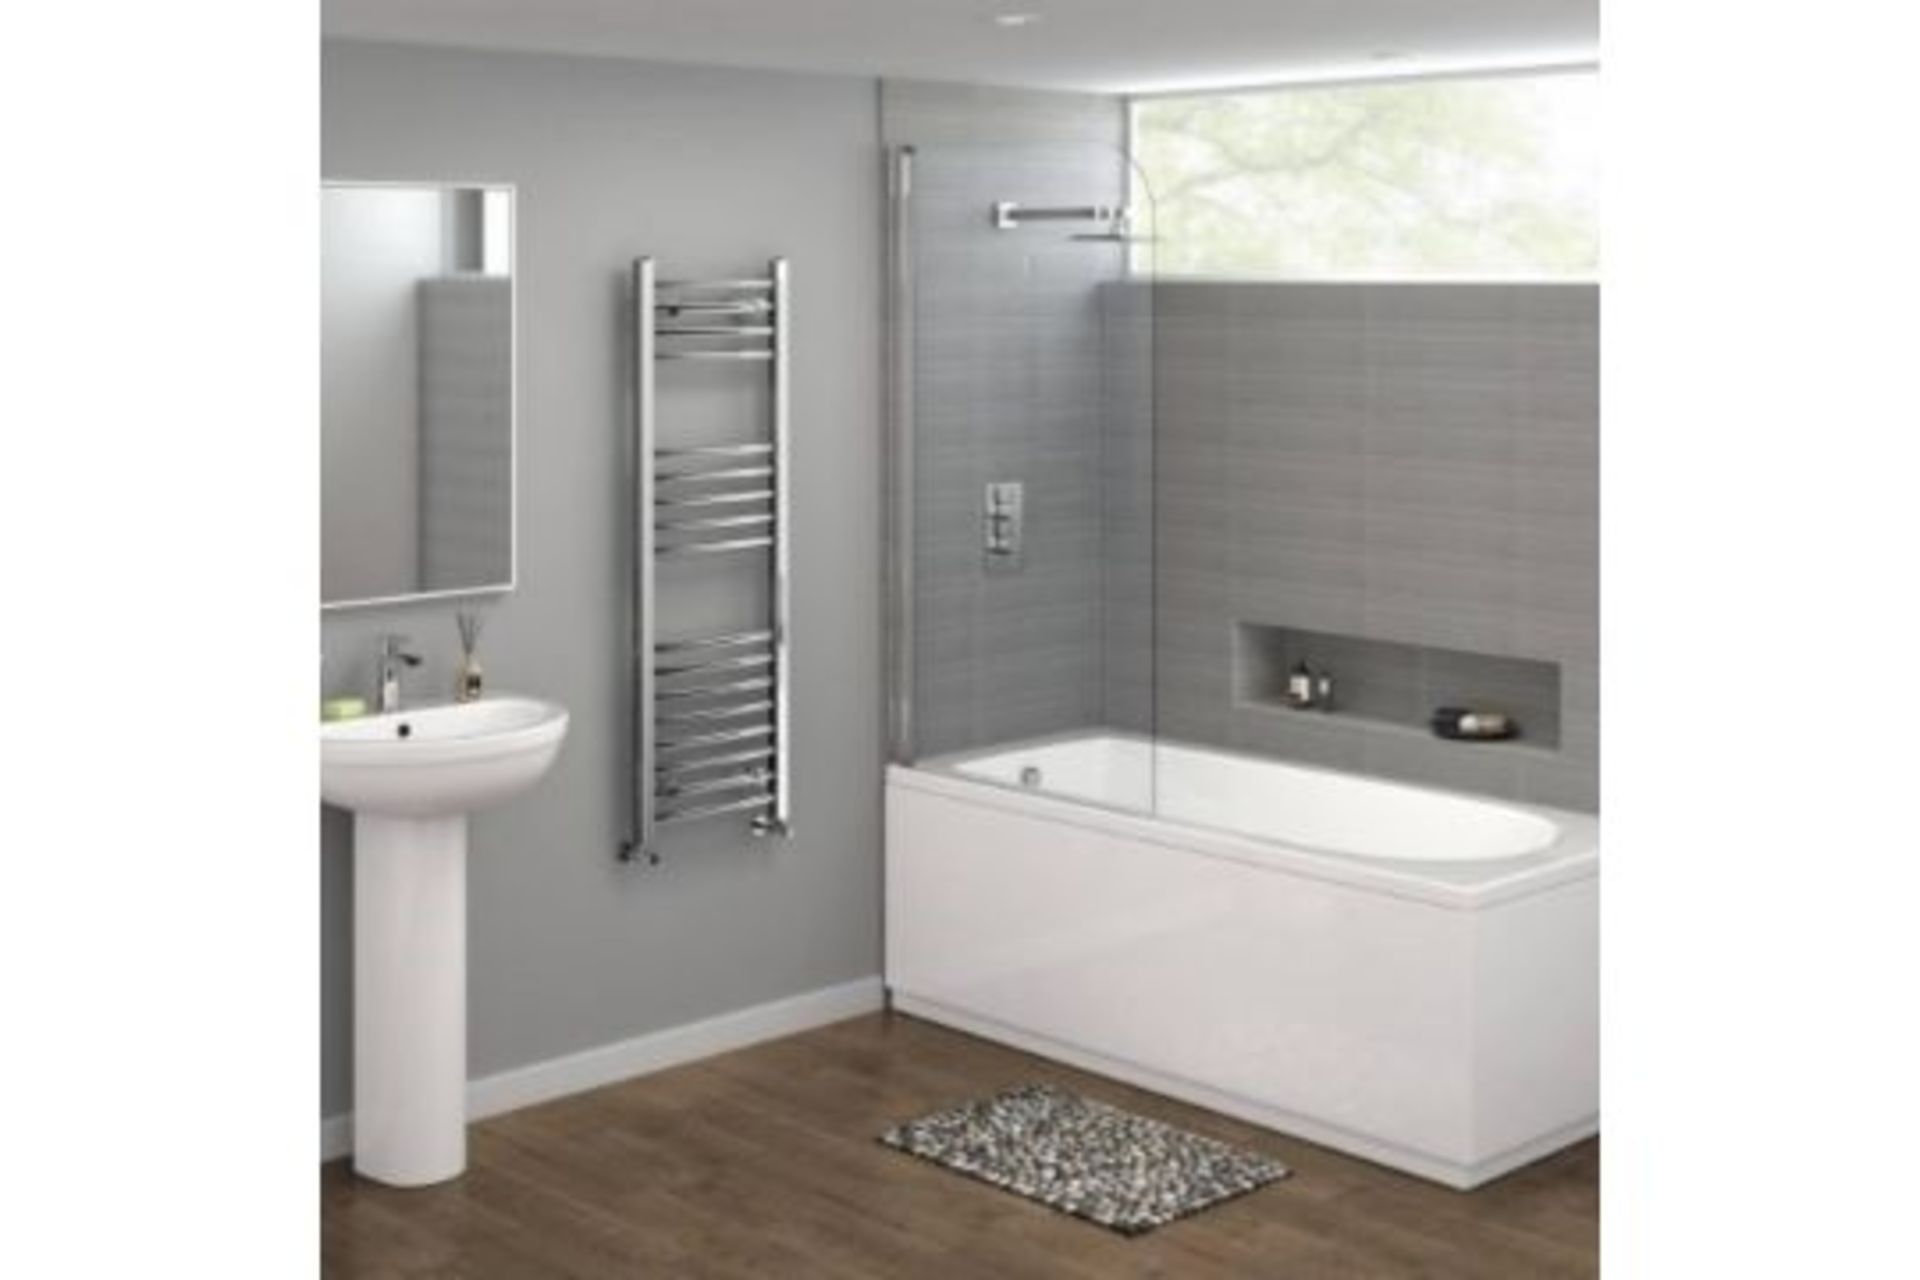 NEW & BOXED 1200x400mm - 20mm Tubes - Chrome Curved Rail Ladder Towel Radiator. NC1200400.Our ... - Image 2 of 3